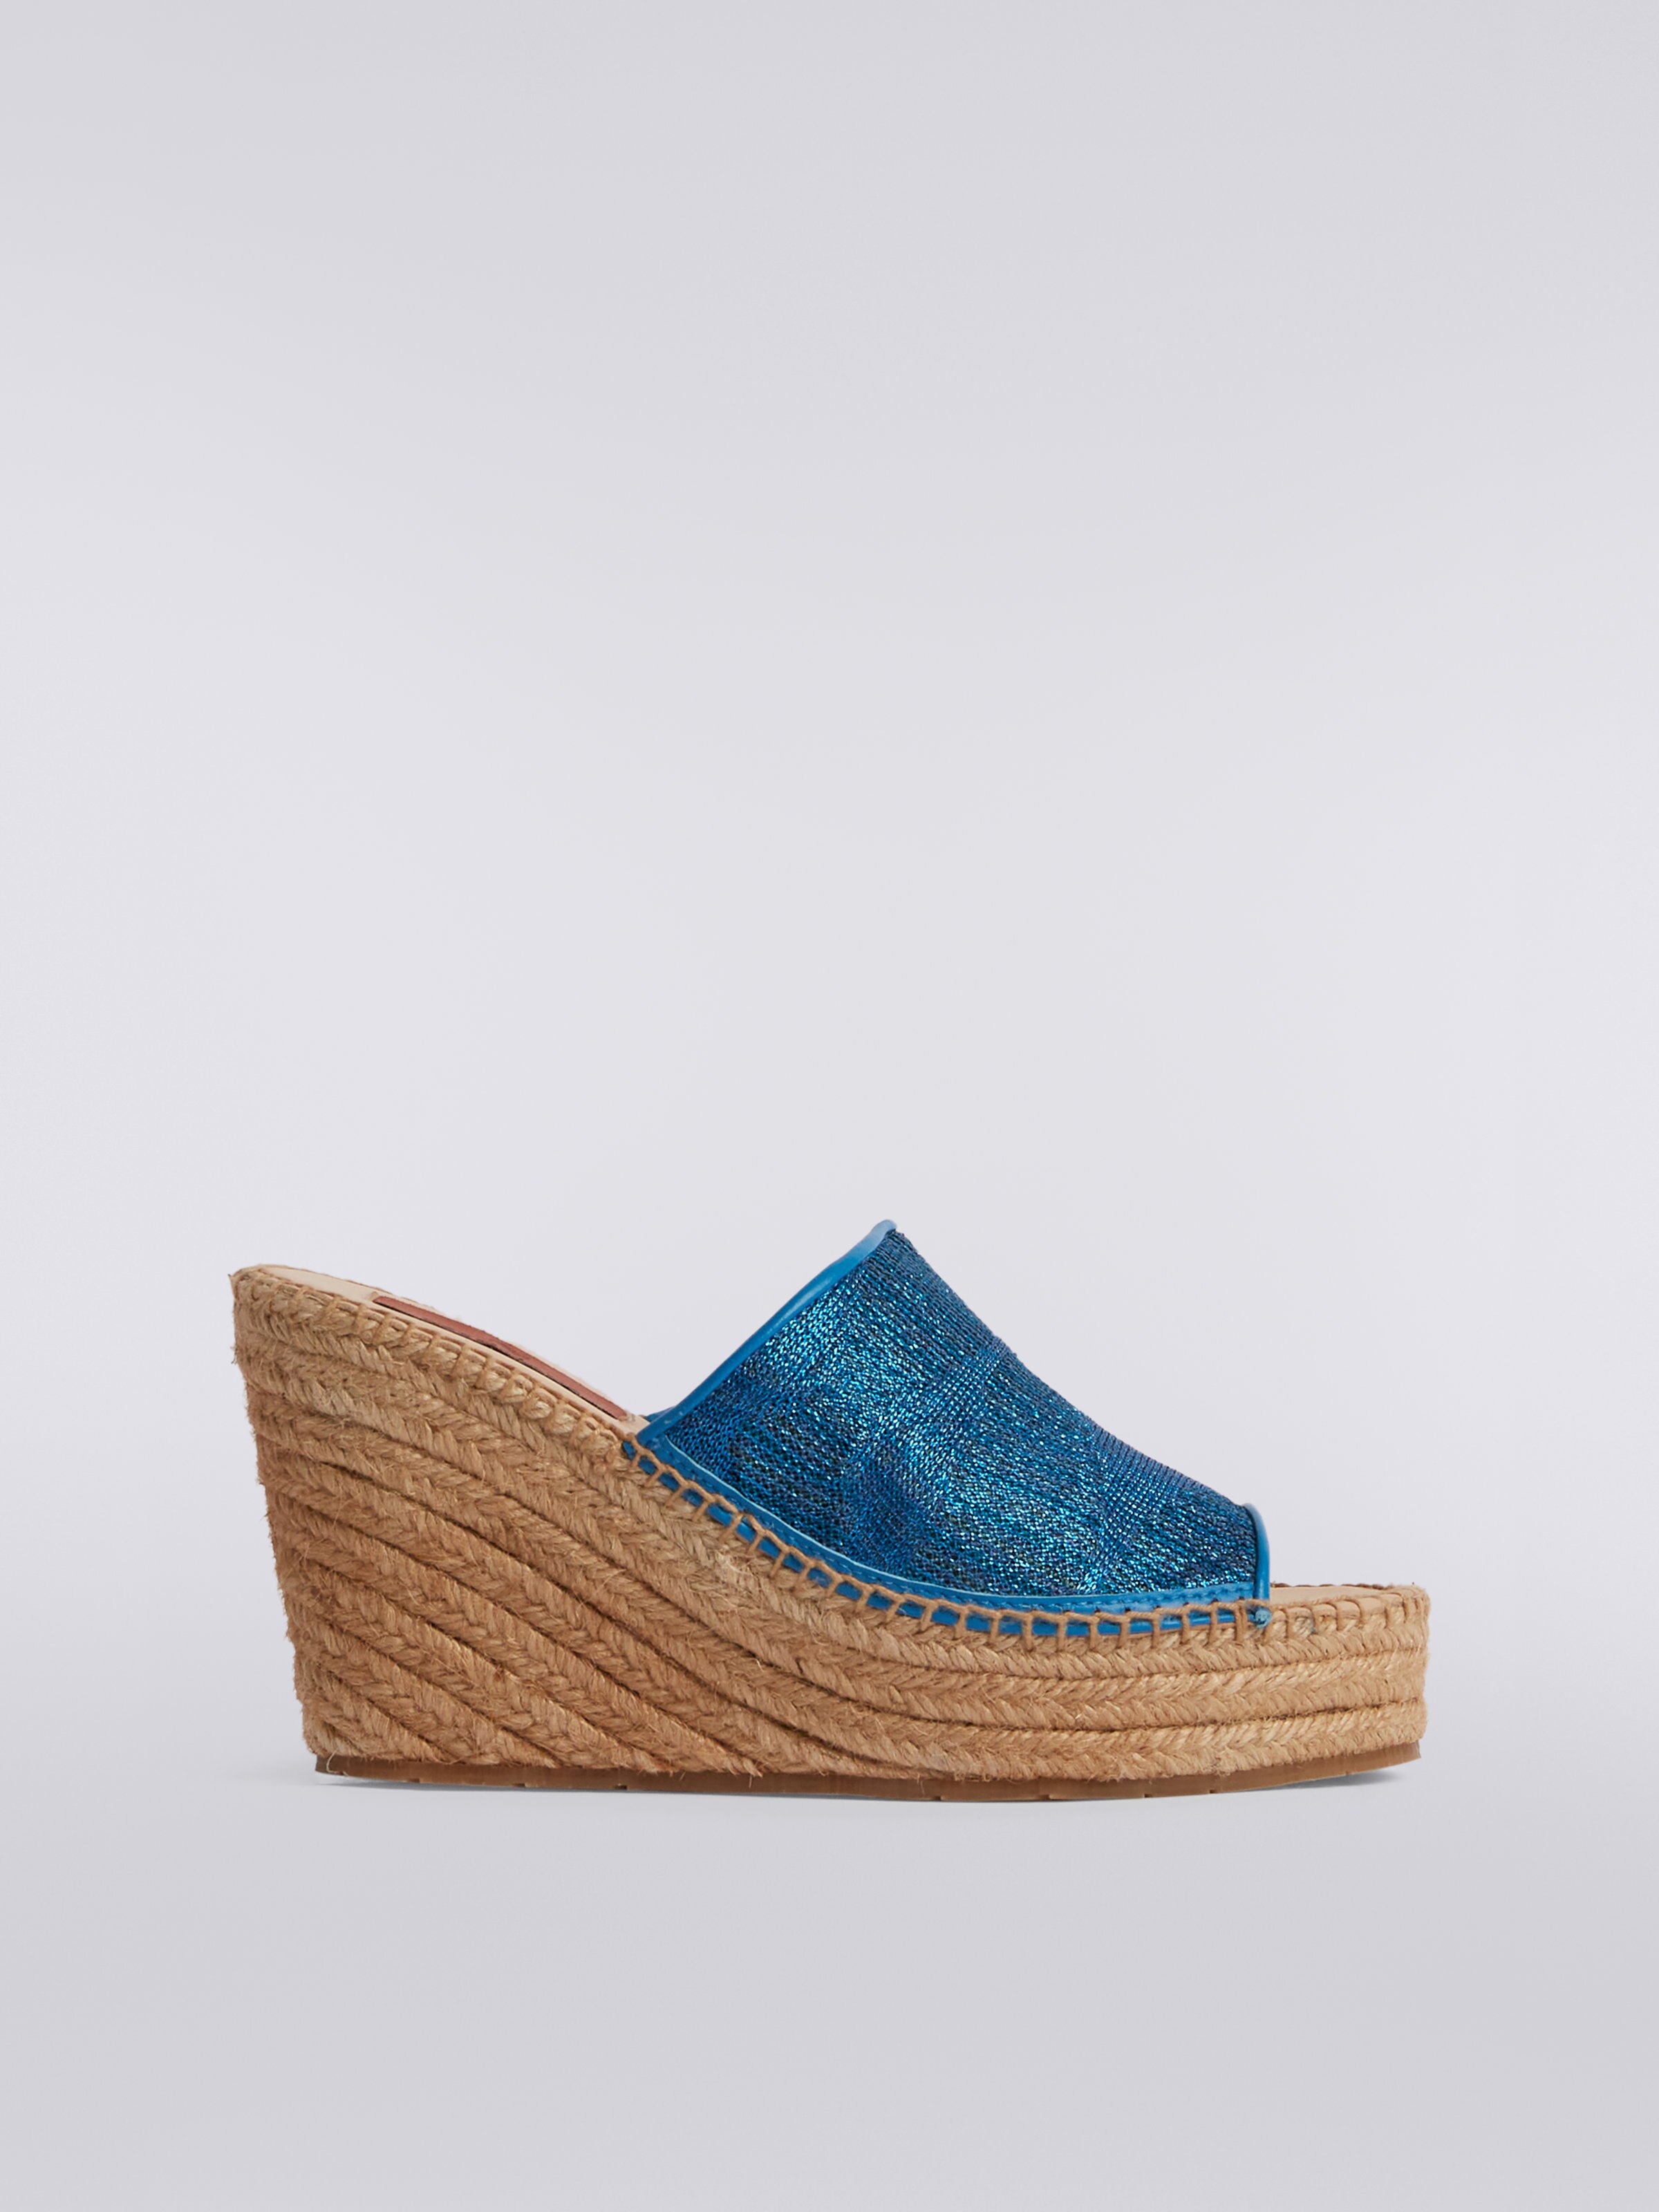 Espadrilles with wedge and chevron knit band, Blue - 0